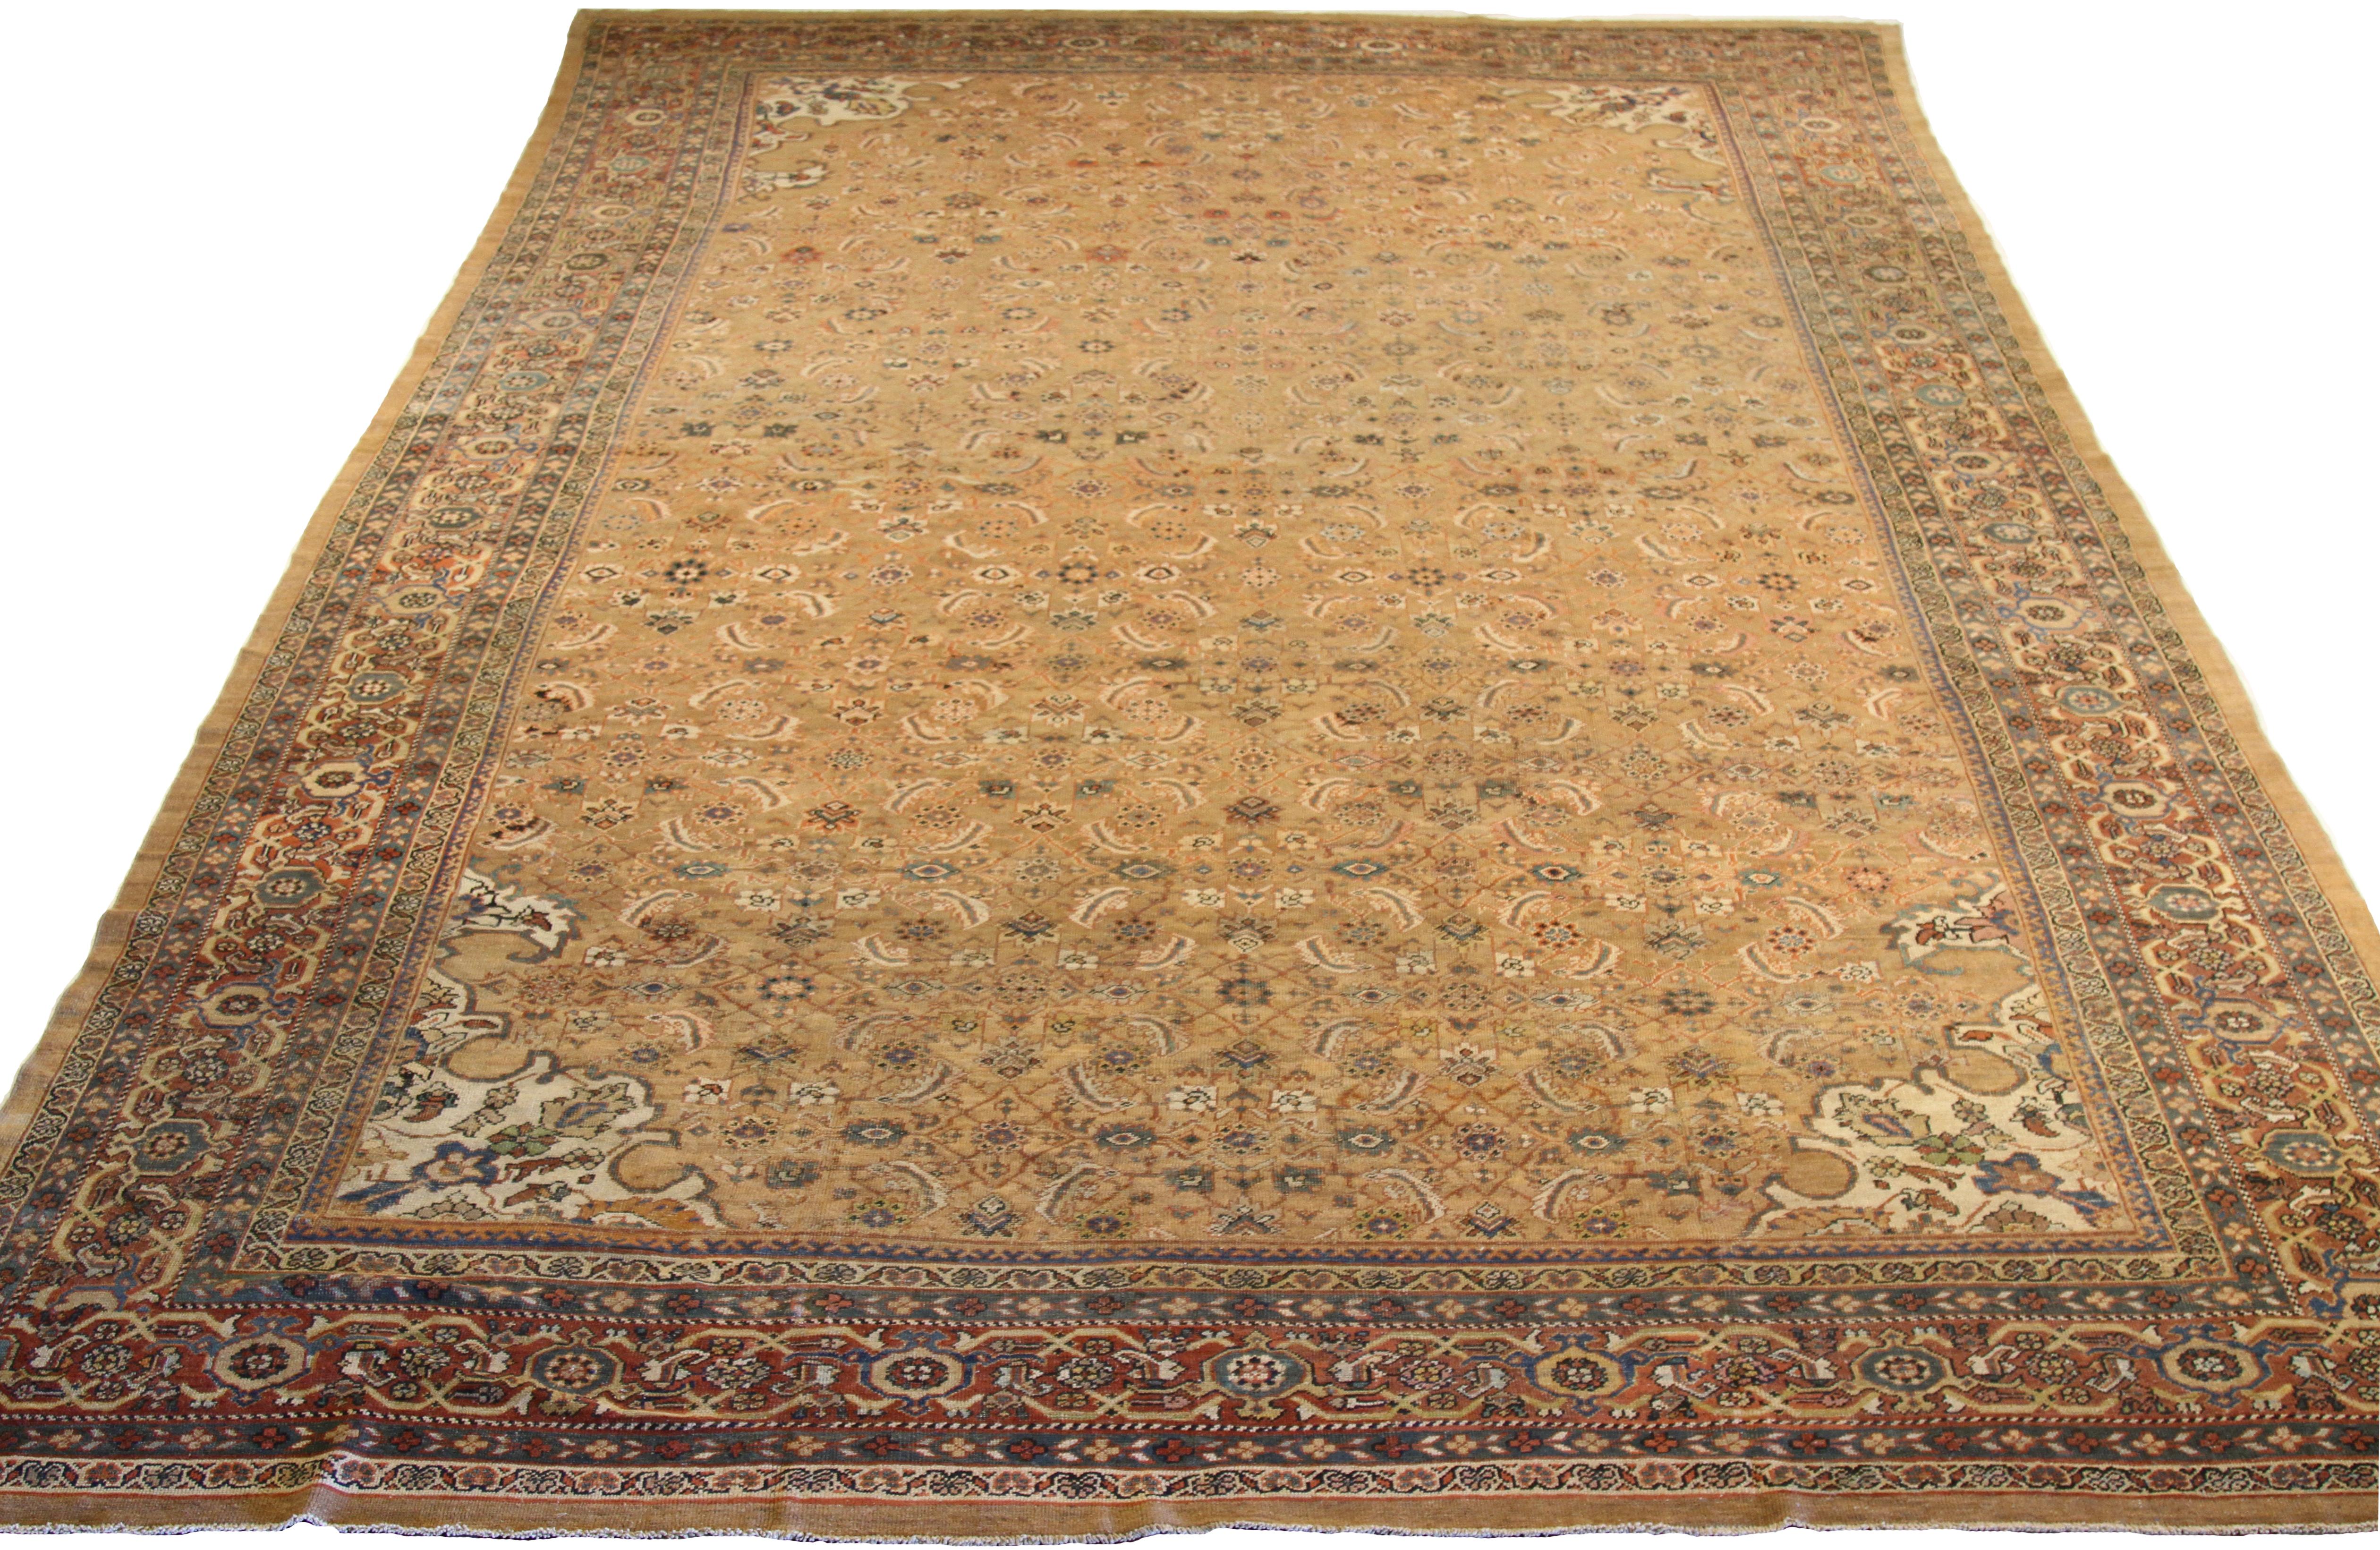 Antique hand-woven Persian area rug made from fine wool and all-natural vegetable dyes that are safe for people and pets. This beautiful piece features a rich field of floral details in various colors which is the traditional weaving design of